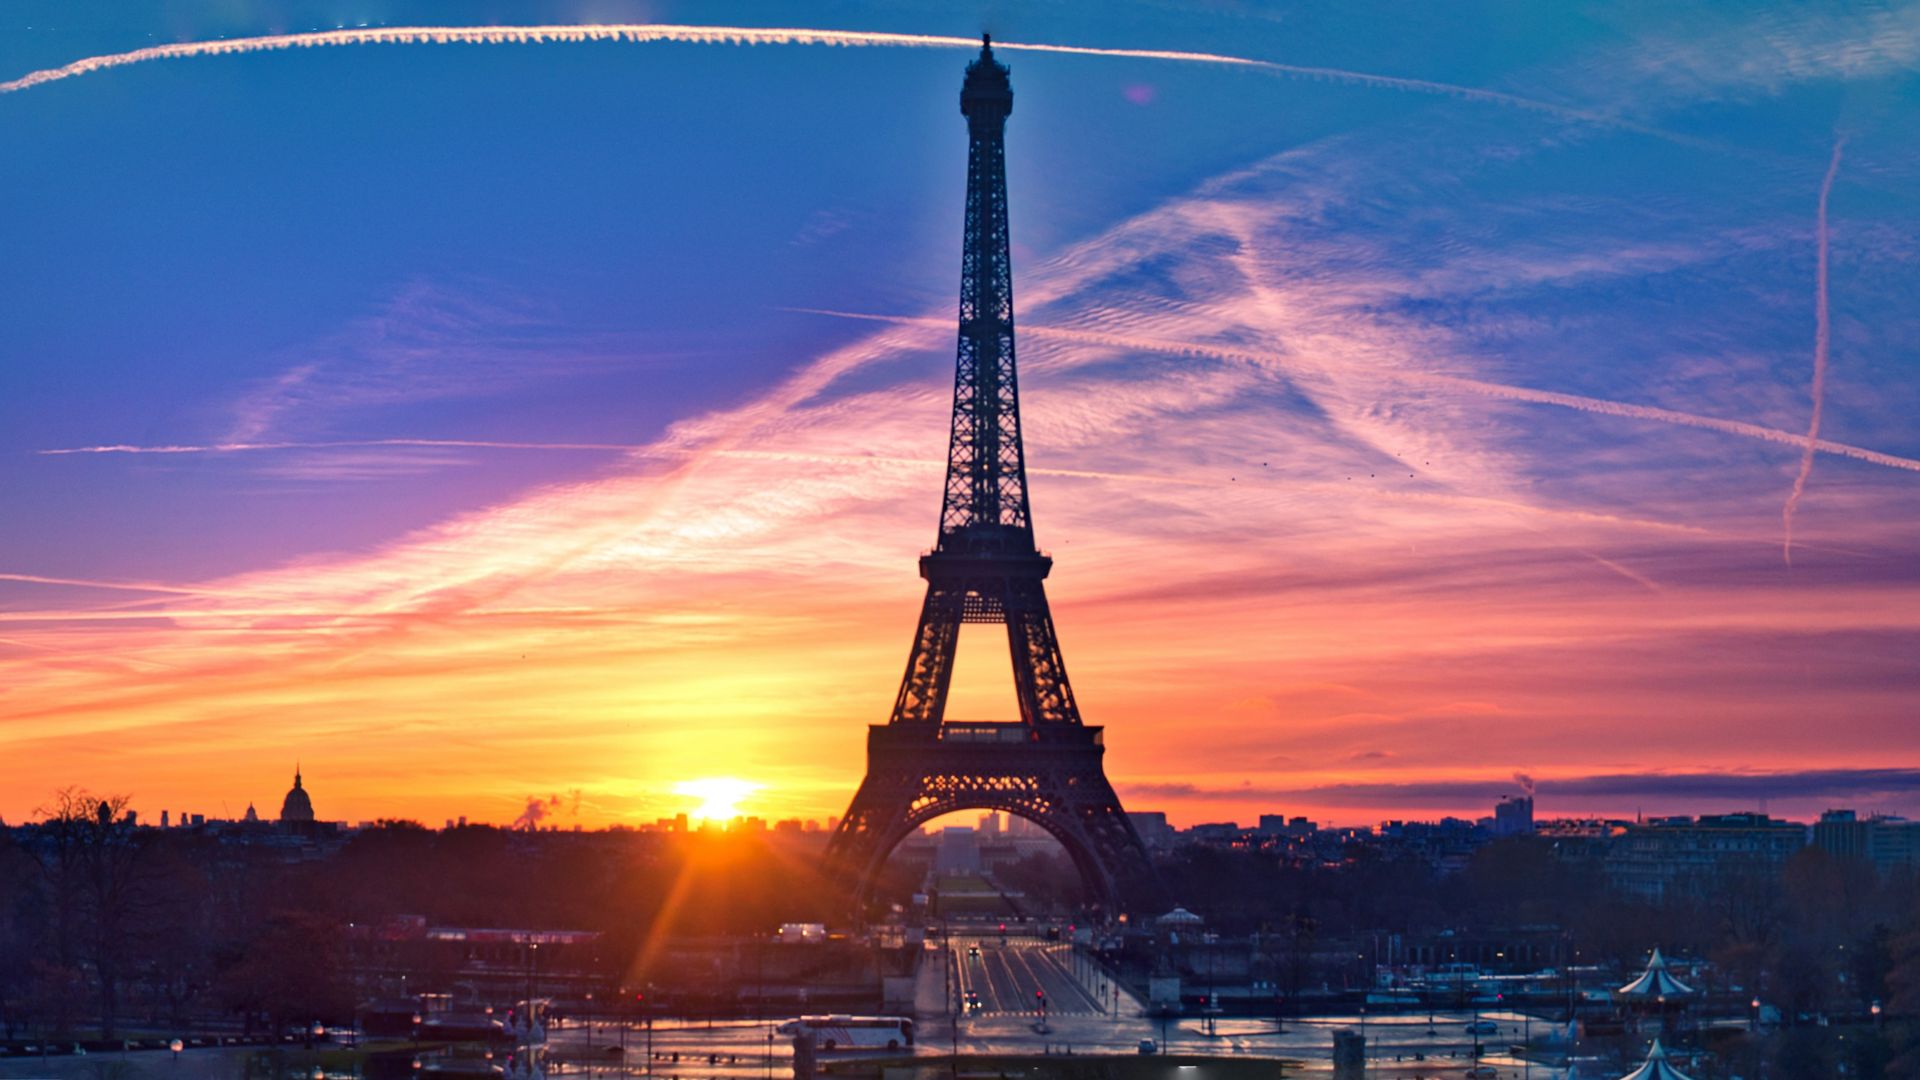 Amazing panorama of Paris very early in the morning, with Eiffel Tower included       